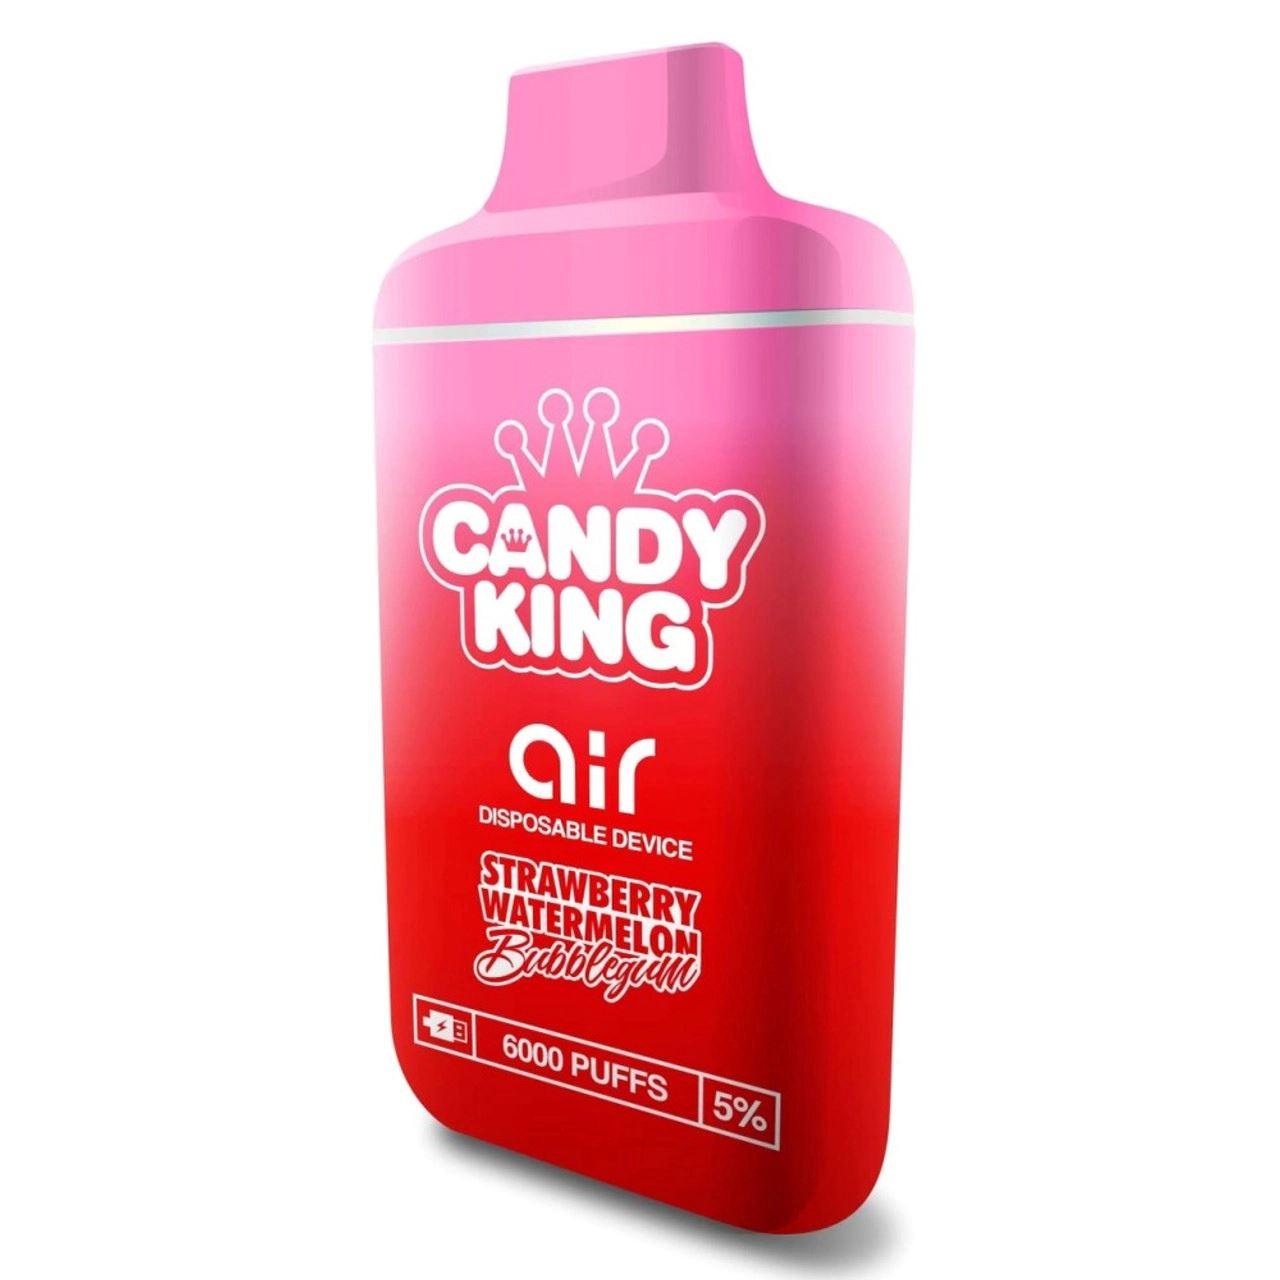 Candy King Air Disposable Vape 6000 Puffs - 3 Pack